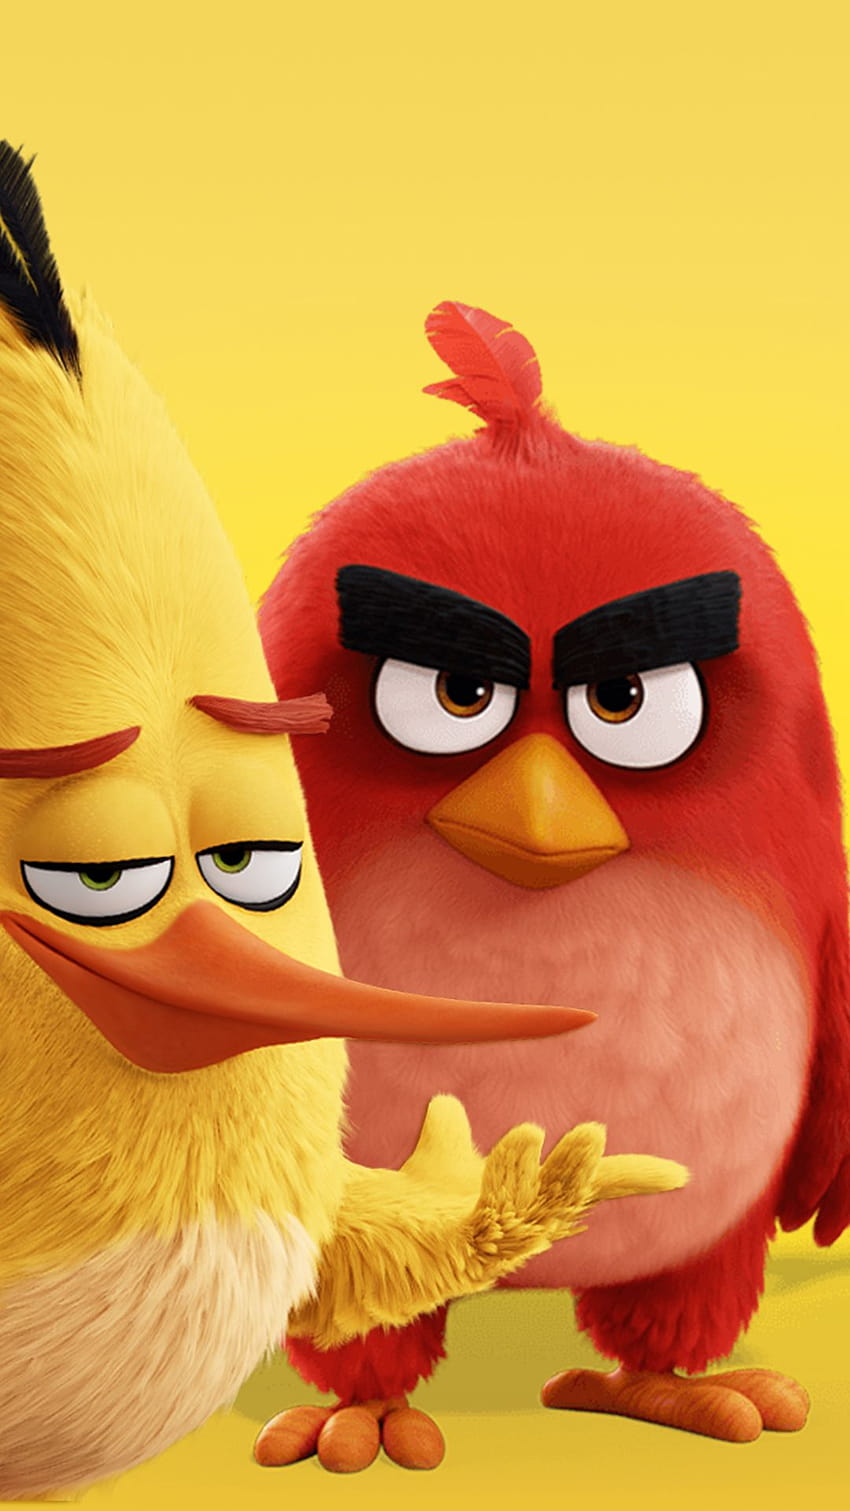 mobile angry birds HD phone wallpaper